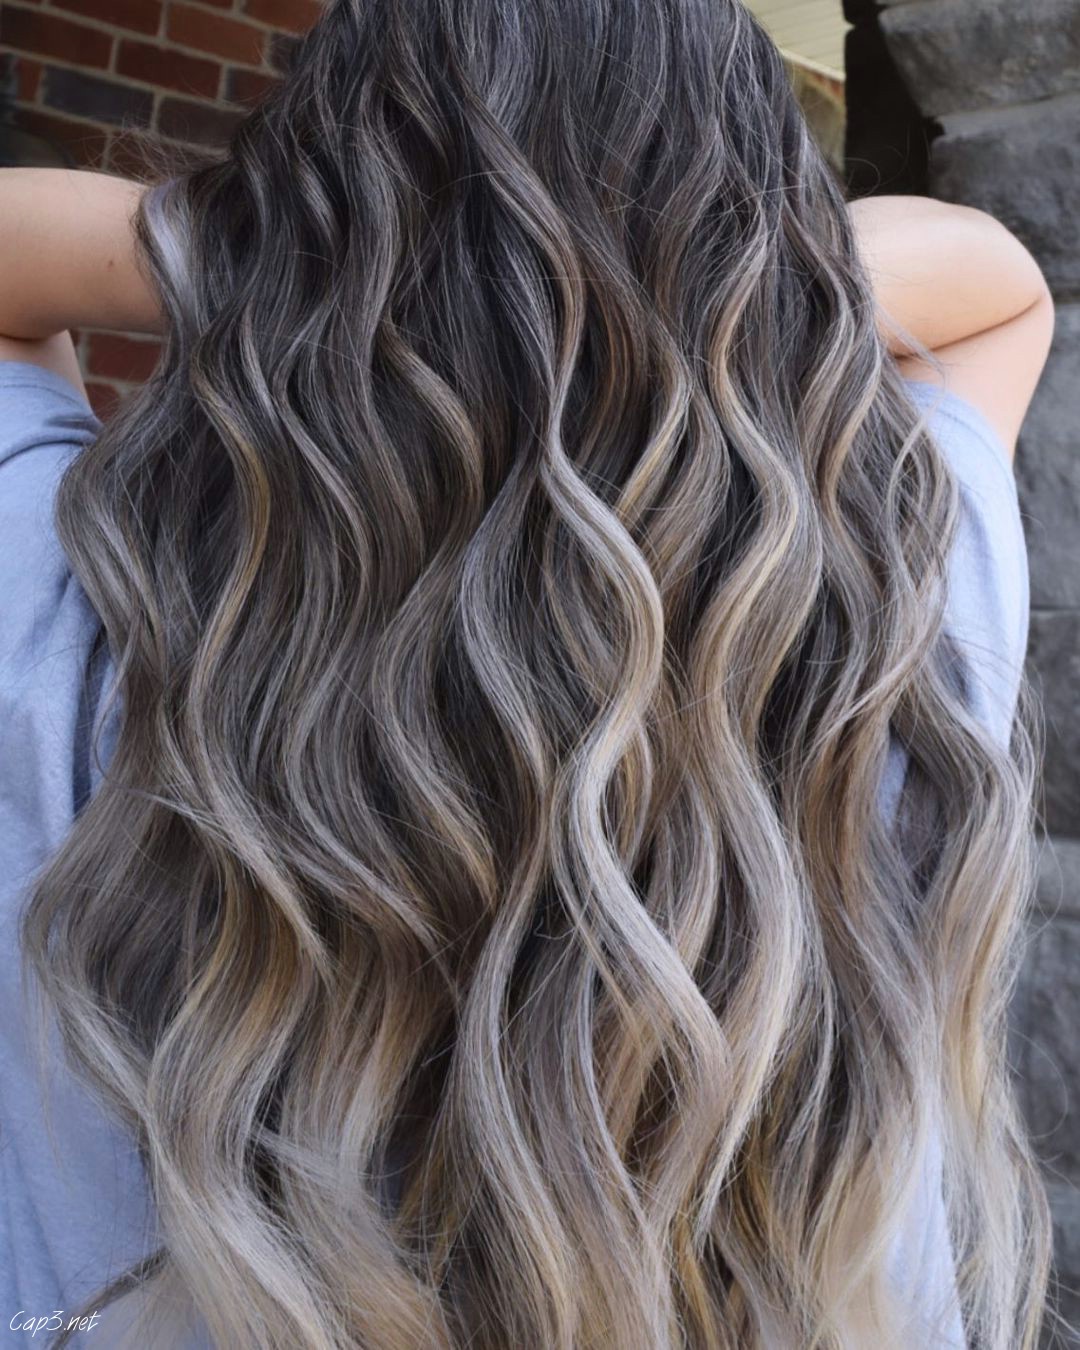 Icy Silver Blonde Hair